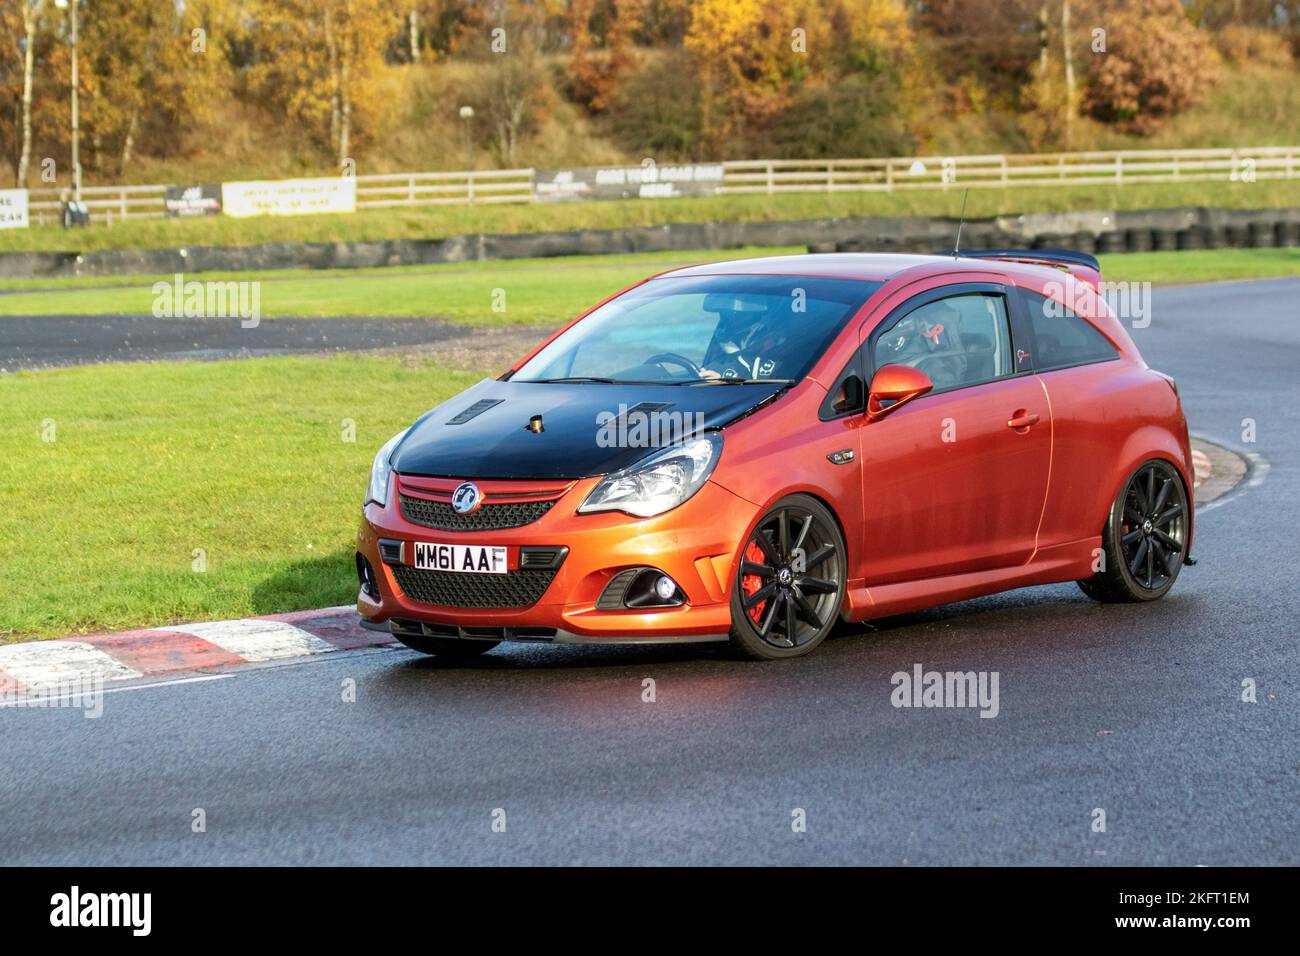 2012 Orange Vauxhall Corsa Vxr Nurburgring Edition 1.6T 205  hatchback petrol Car1598 cc; driving on challenging high-speed and technical low-geared corners of the Three sisters race circuit near Wigan, UK Stock Photo